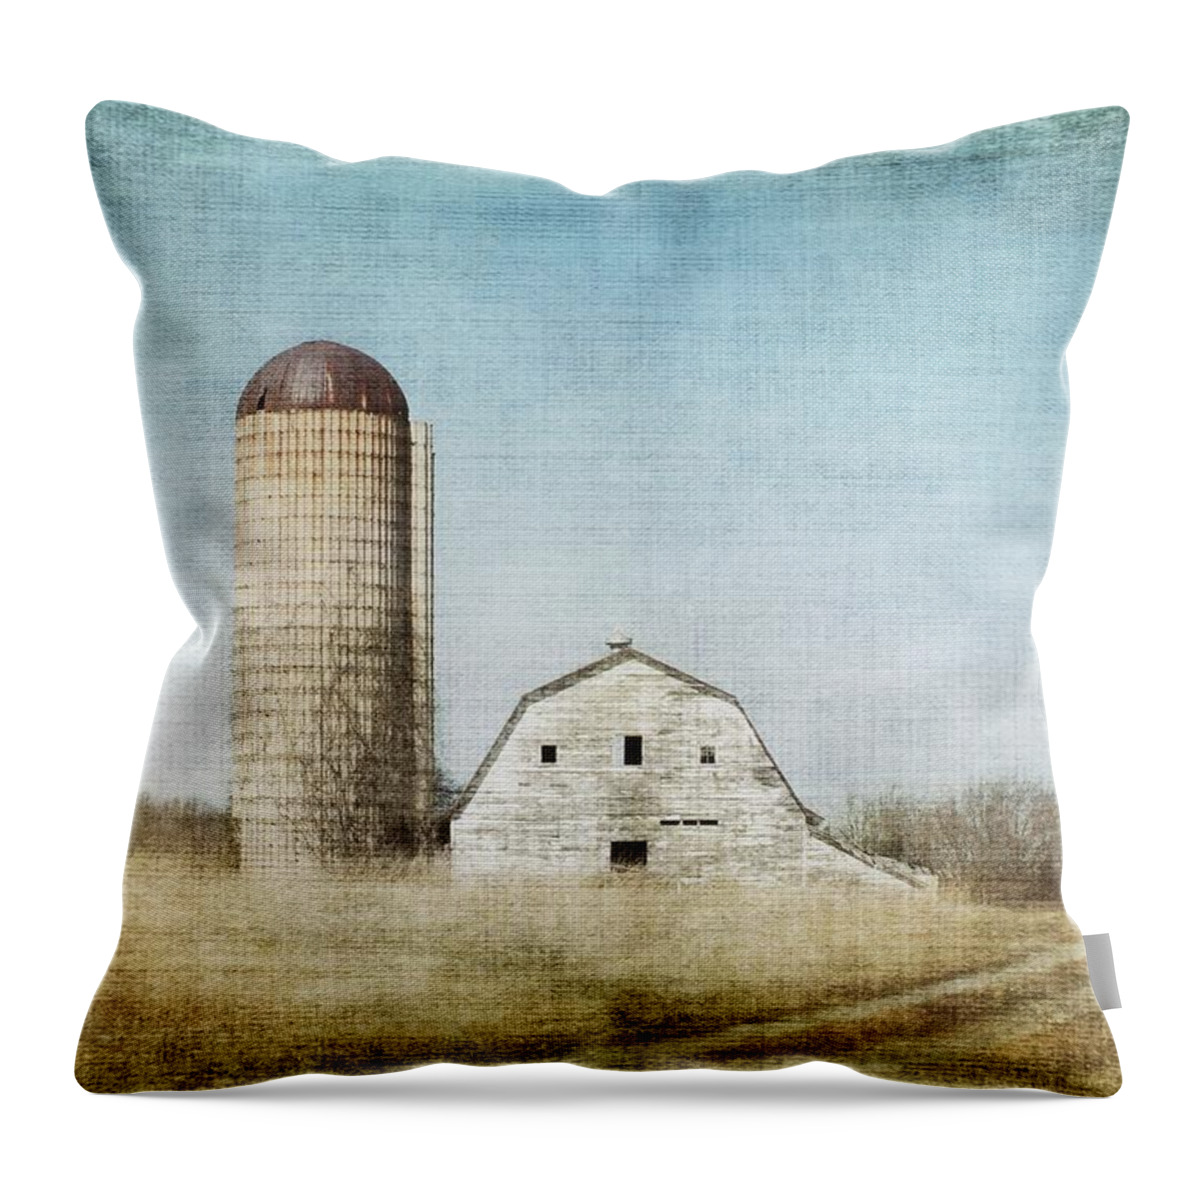 Rustic Dairy Barn Throw Pillow featuring the photograph Rustic Dairy Barn by Melissa Bittinger